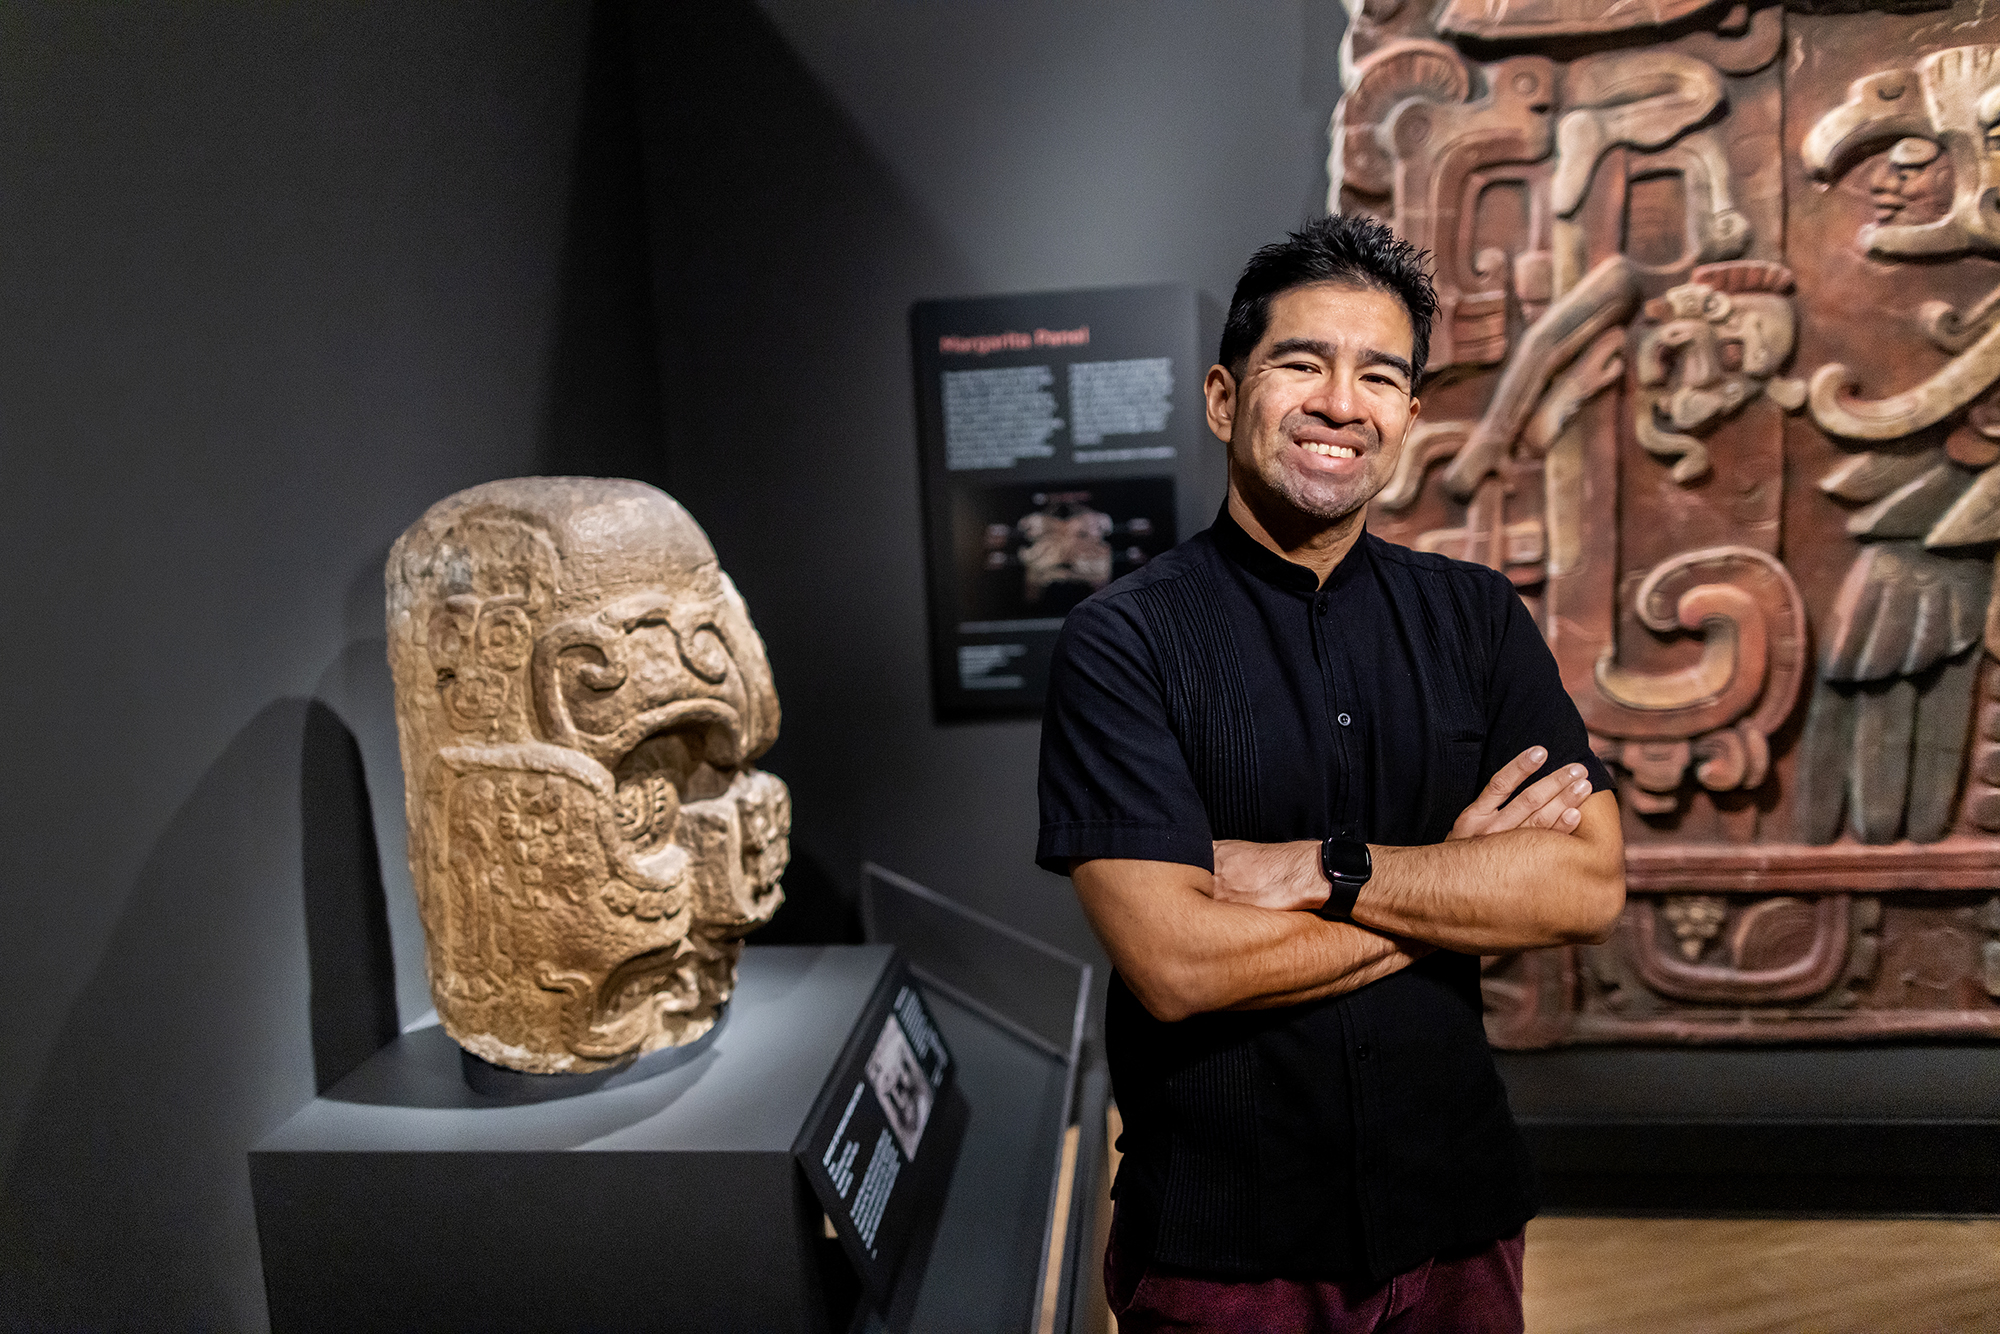 Francisco Diaz at the Penn Museum with carved stone reliefs made by his ancestors